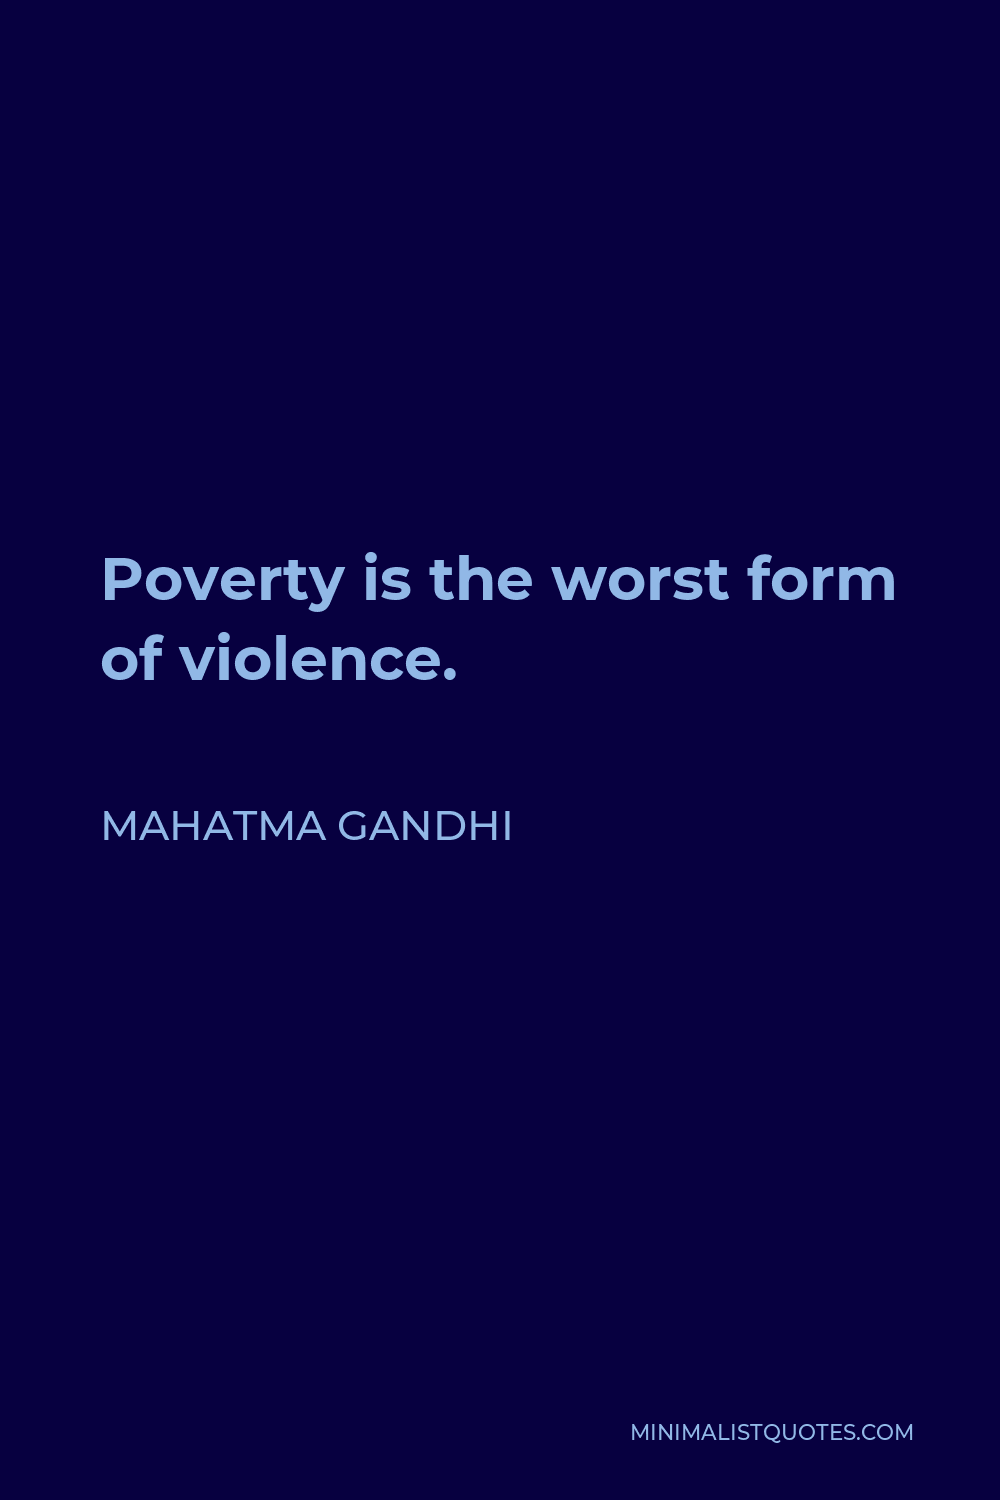 Mahatma Gandhi Quote - Poverty is the worst form of violence.